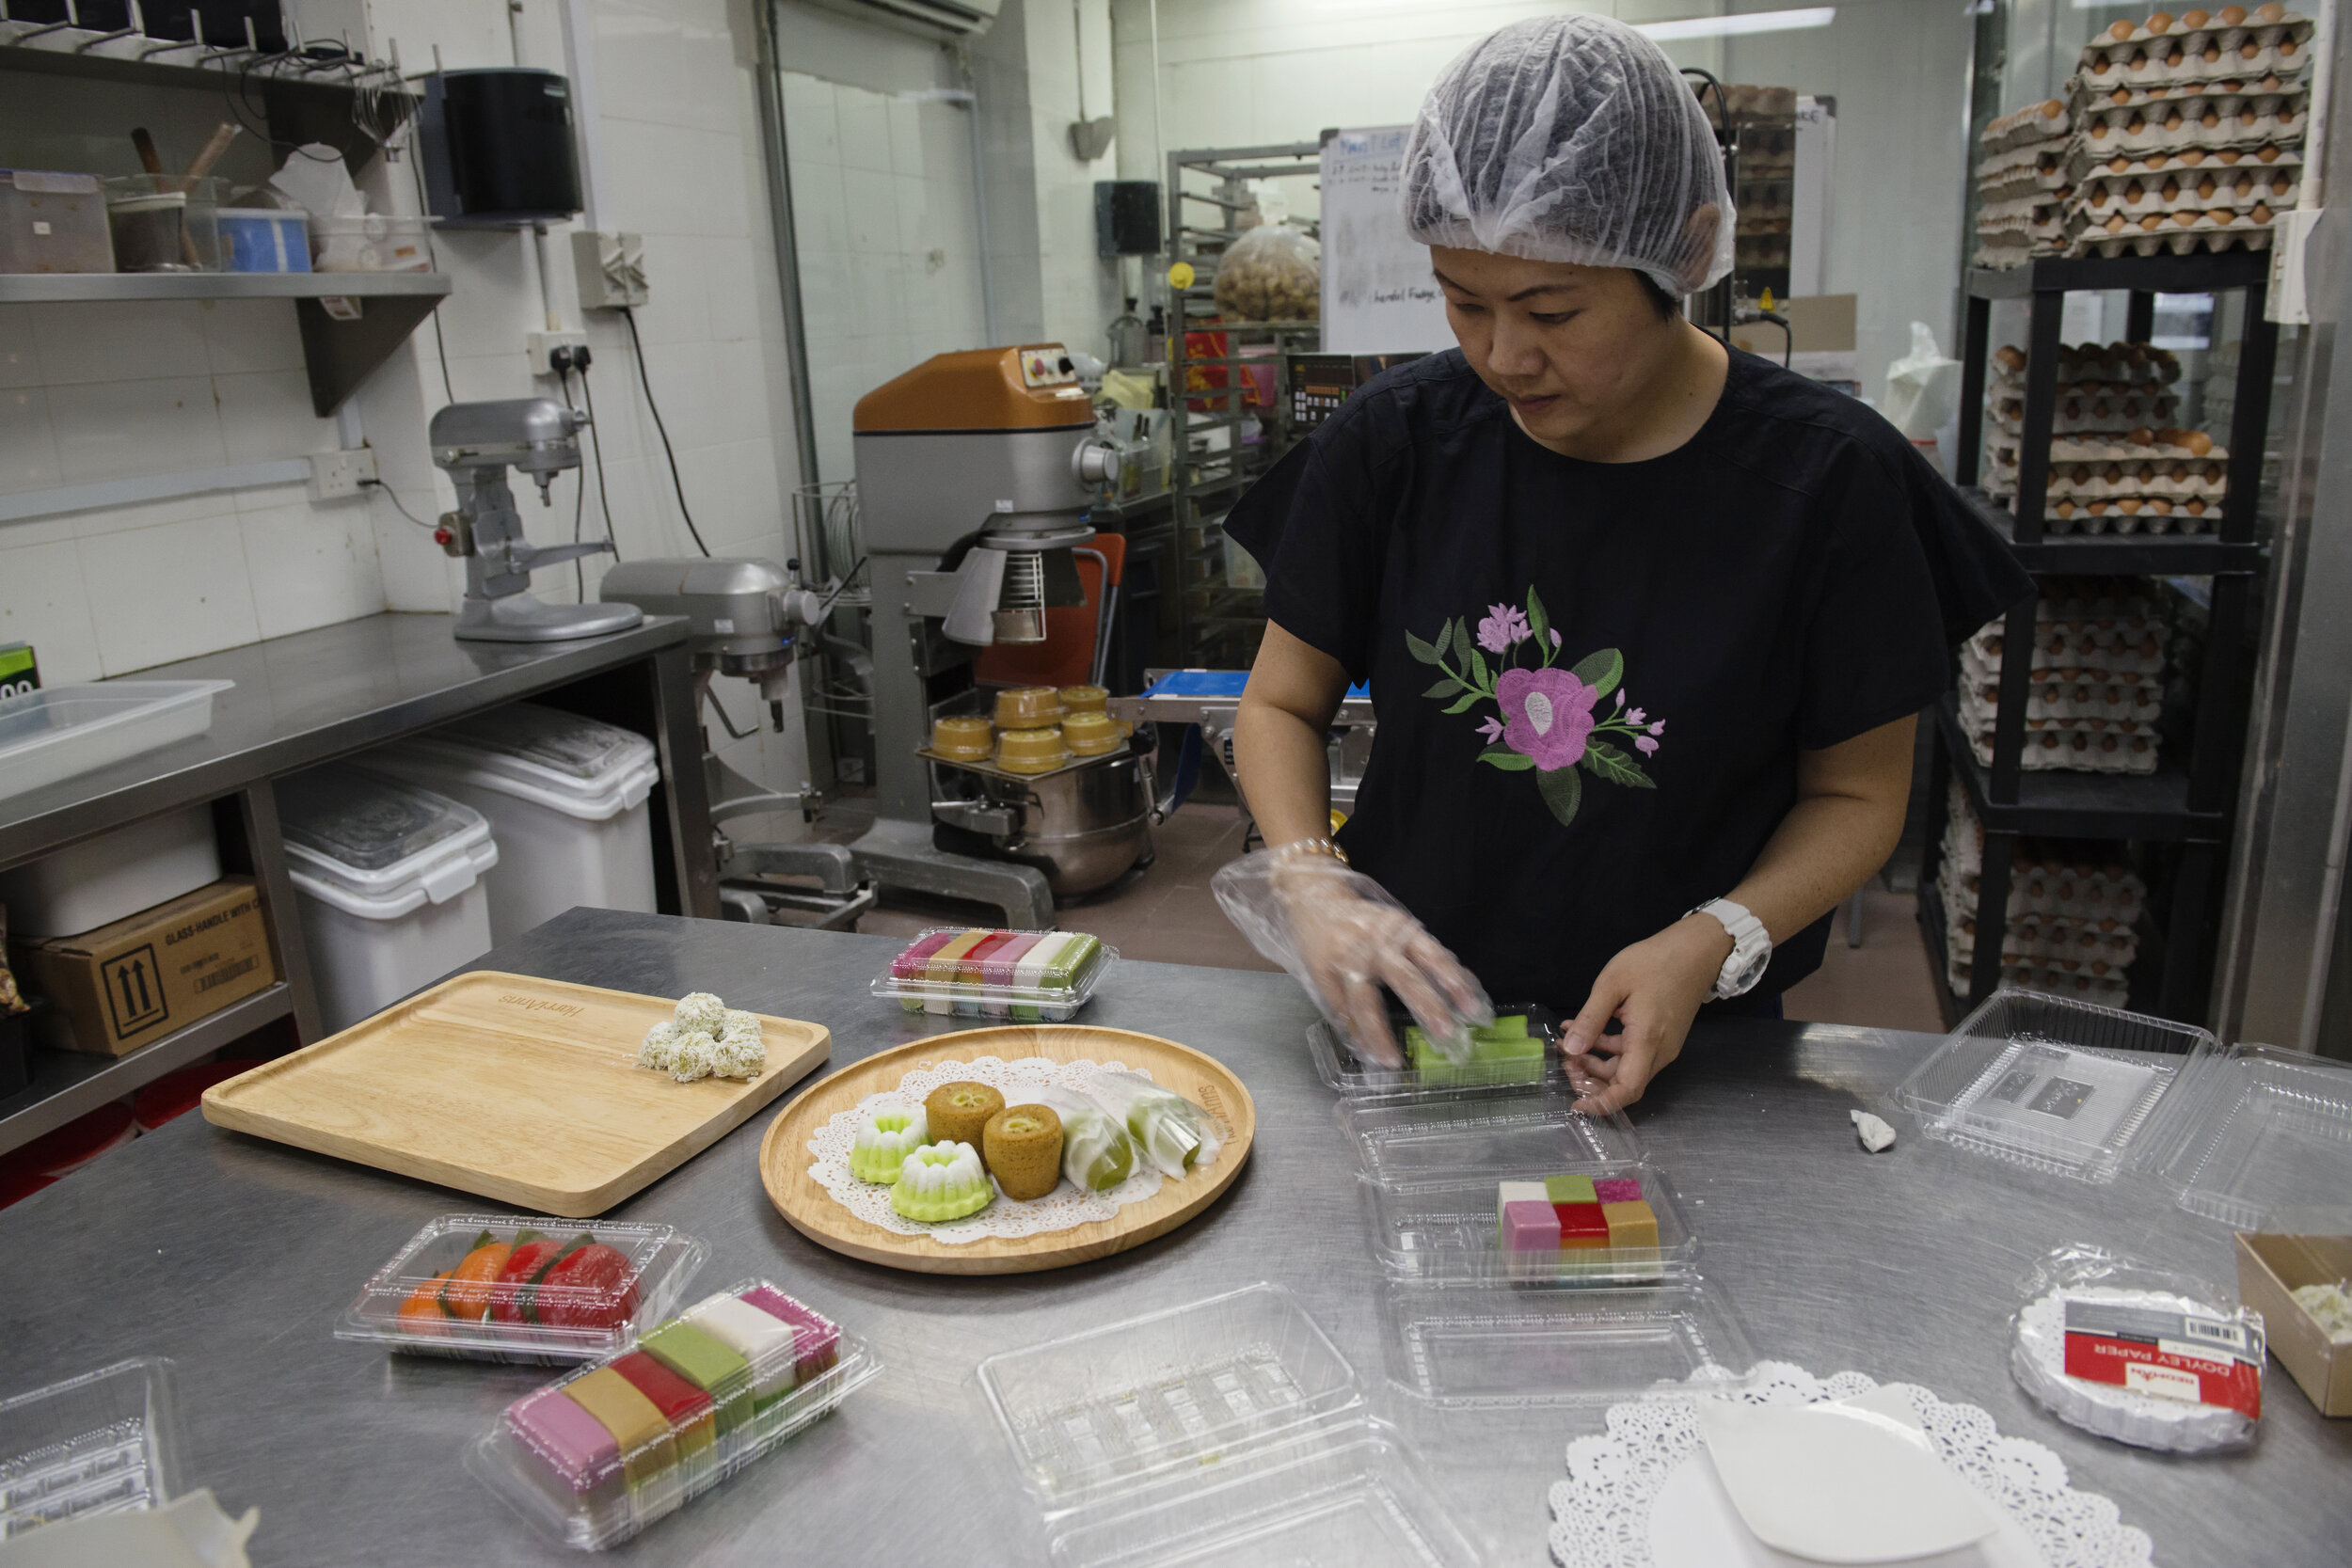  Sharon Goh, third-generation co-owner of traditional Peranakan confectionery HarriAnns, plates an assortment of Nonya kueh at their central kitchen in Singapore April 20, 2018.  